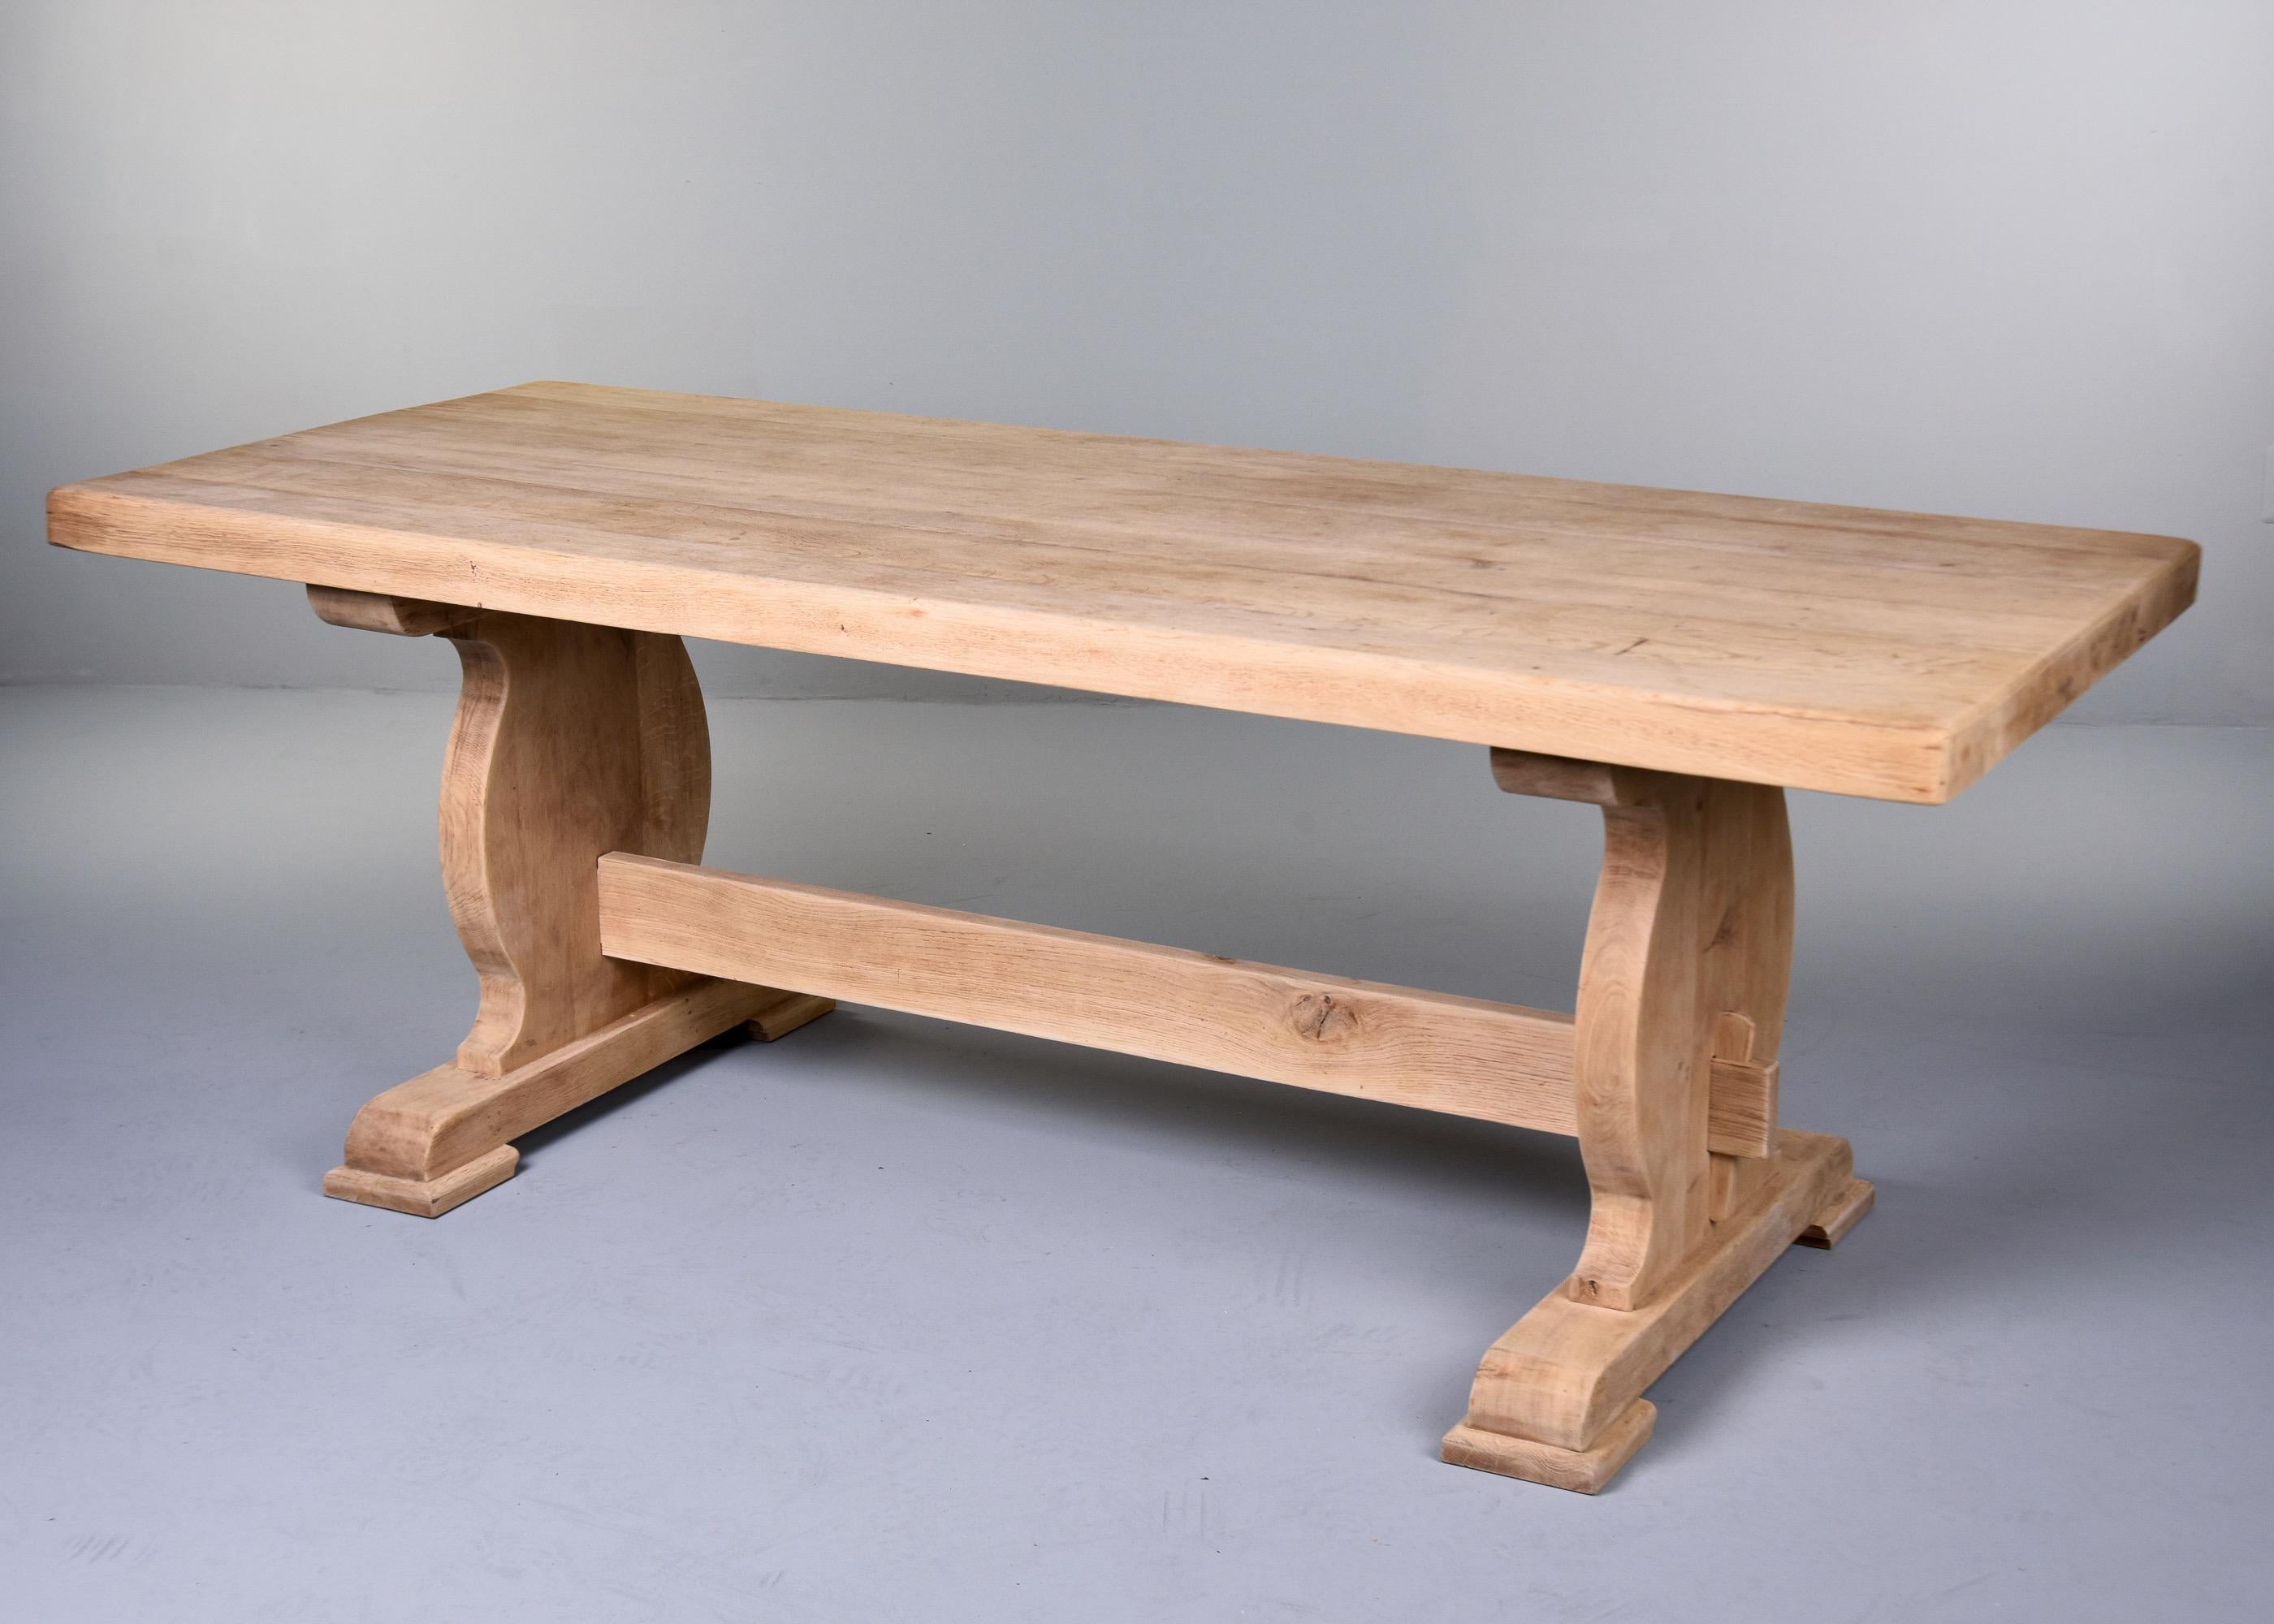 French Provincial Circa 1900 Sanded Bare Oak French Country Trestle Table For Sale